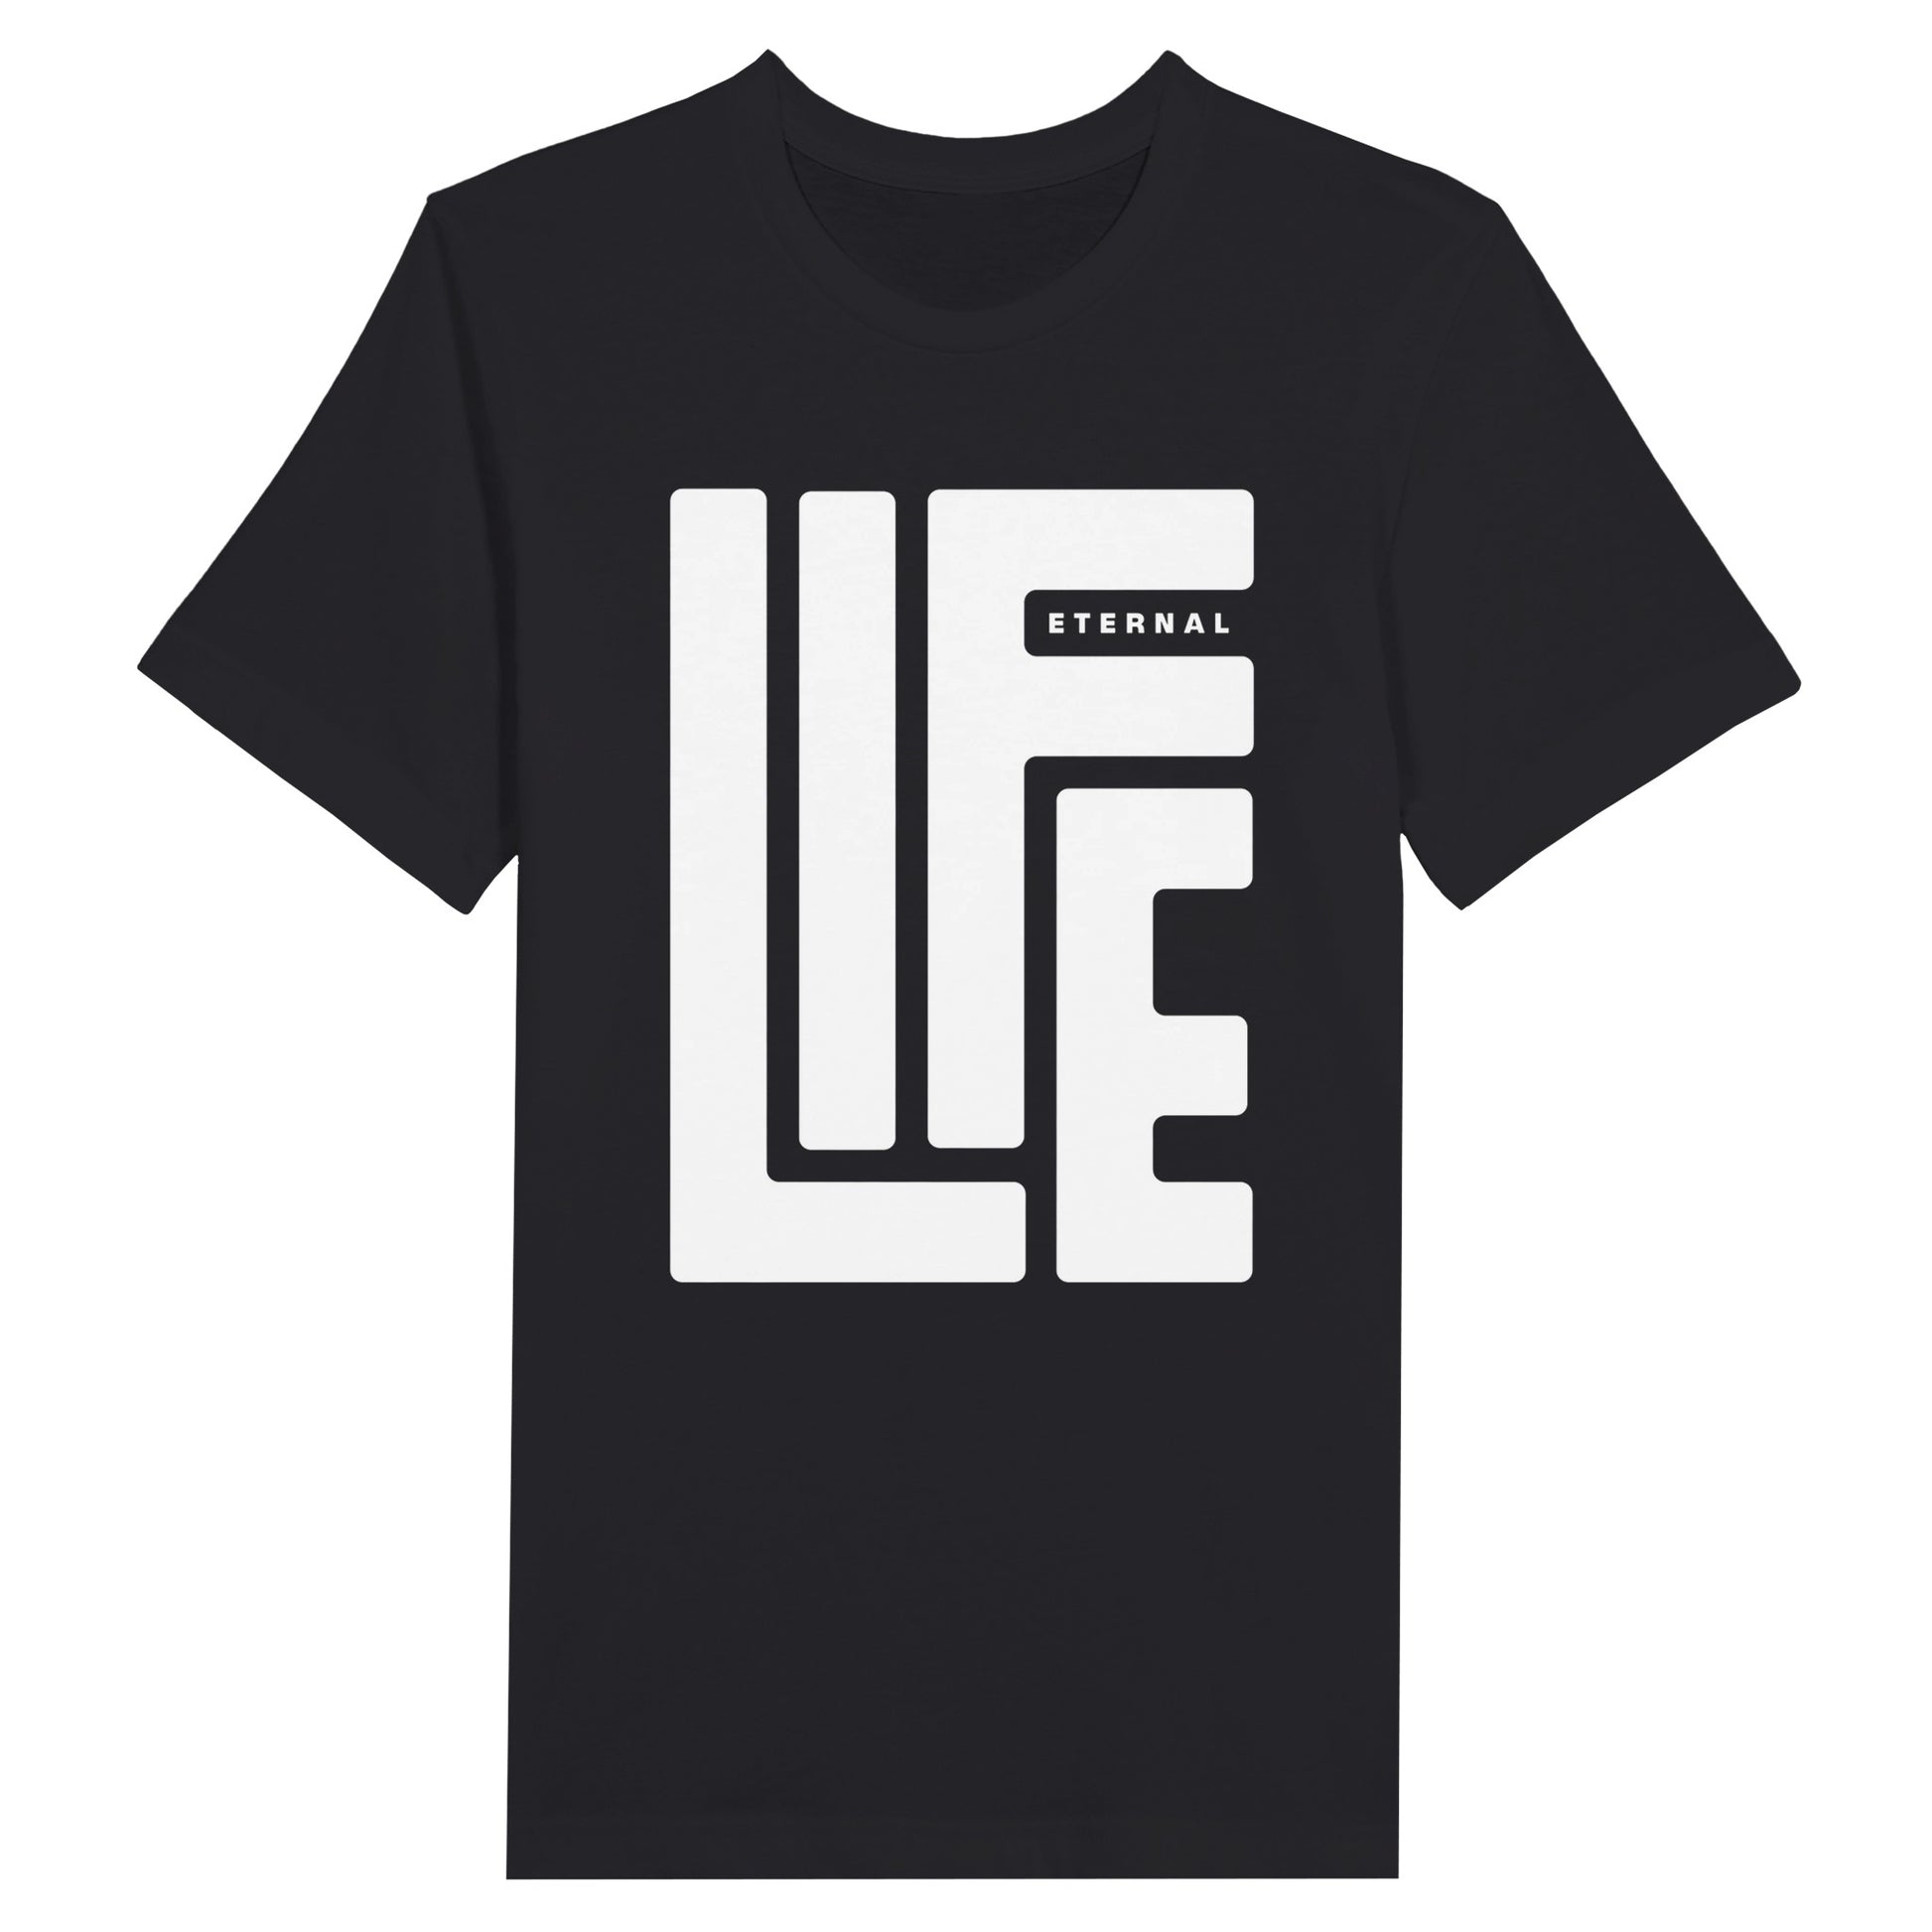 An image of ETERNAL LIFE | Premium Unisex Christian T-shirt available at 3rd Day Christian Clothing UK